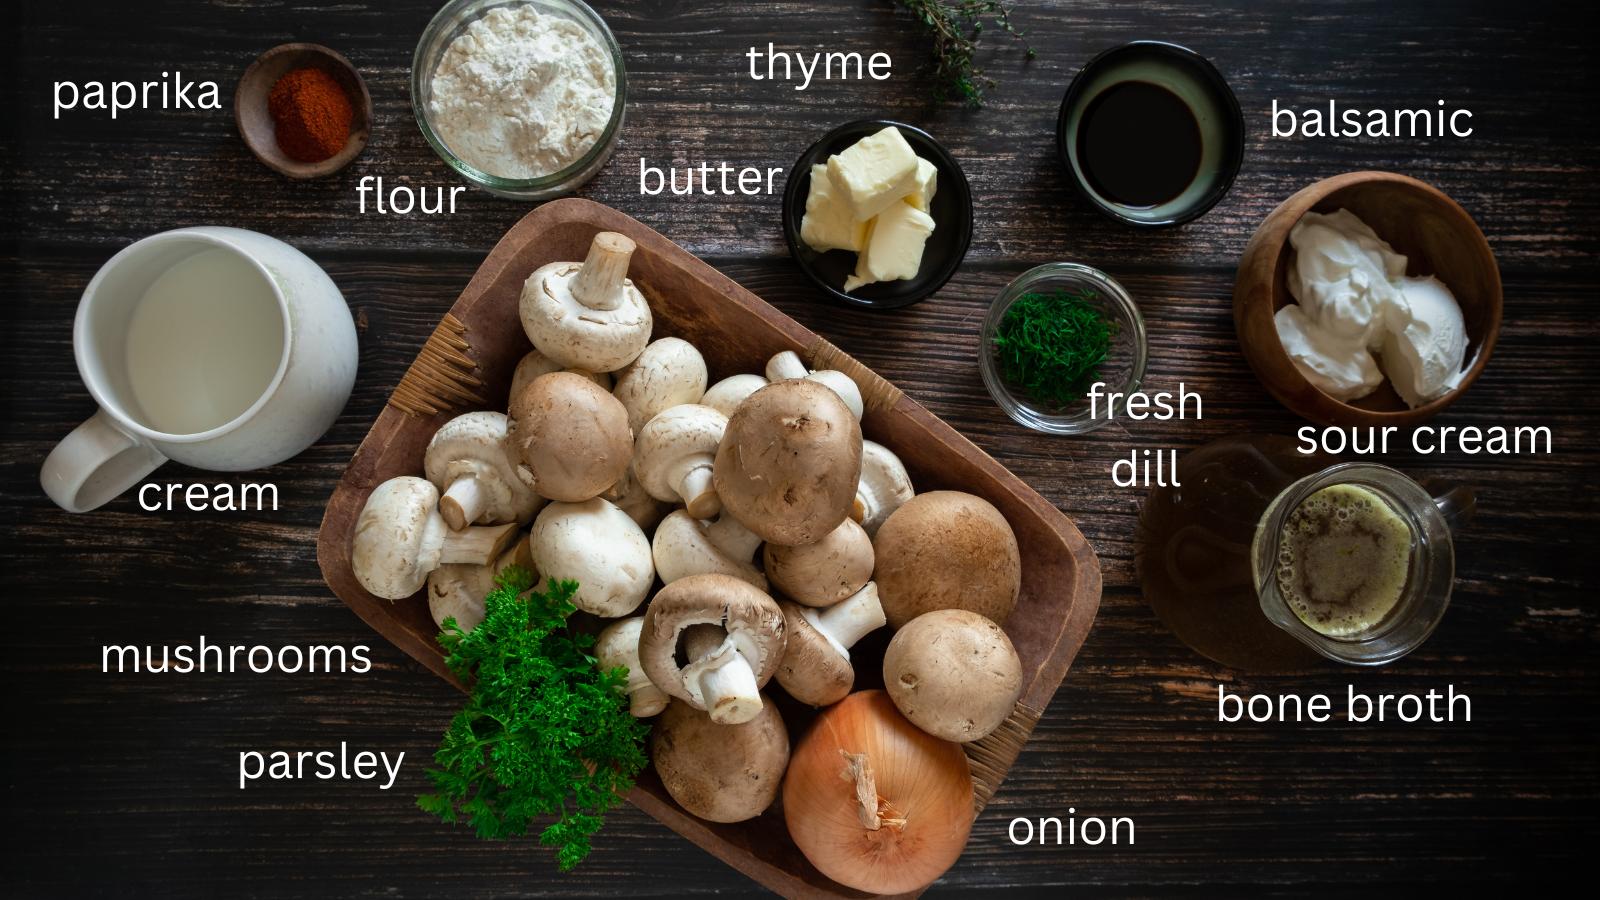 All of the ingredients needed to make Hungarian mushroom soup.